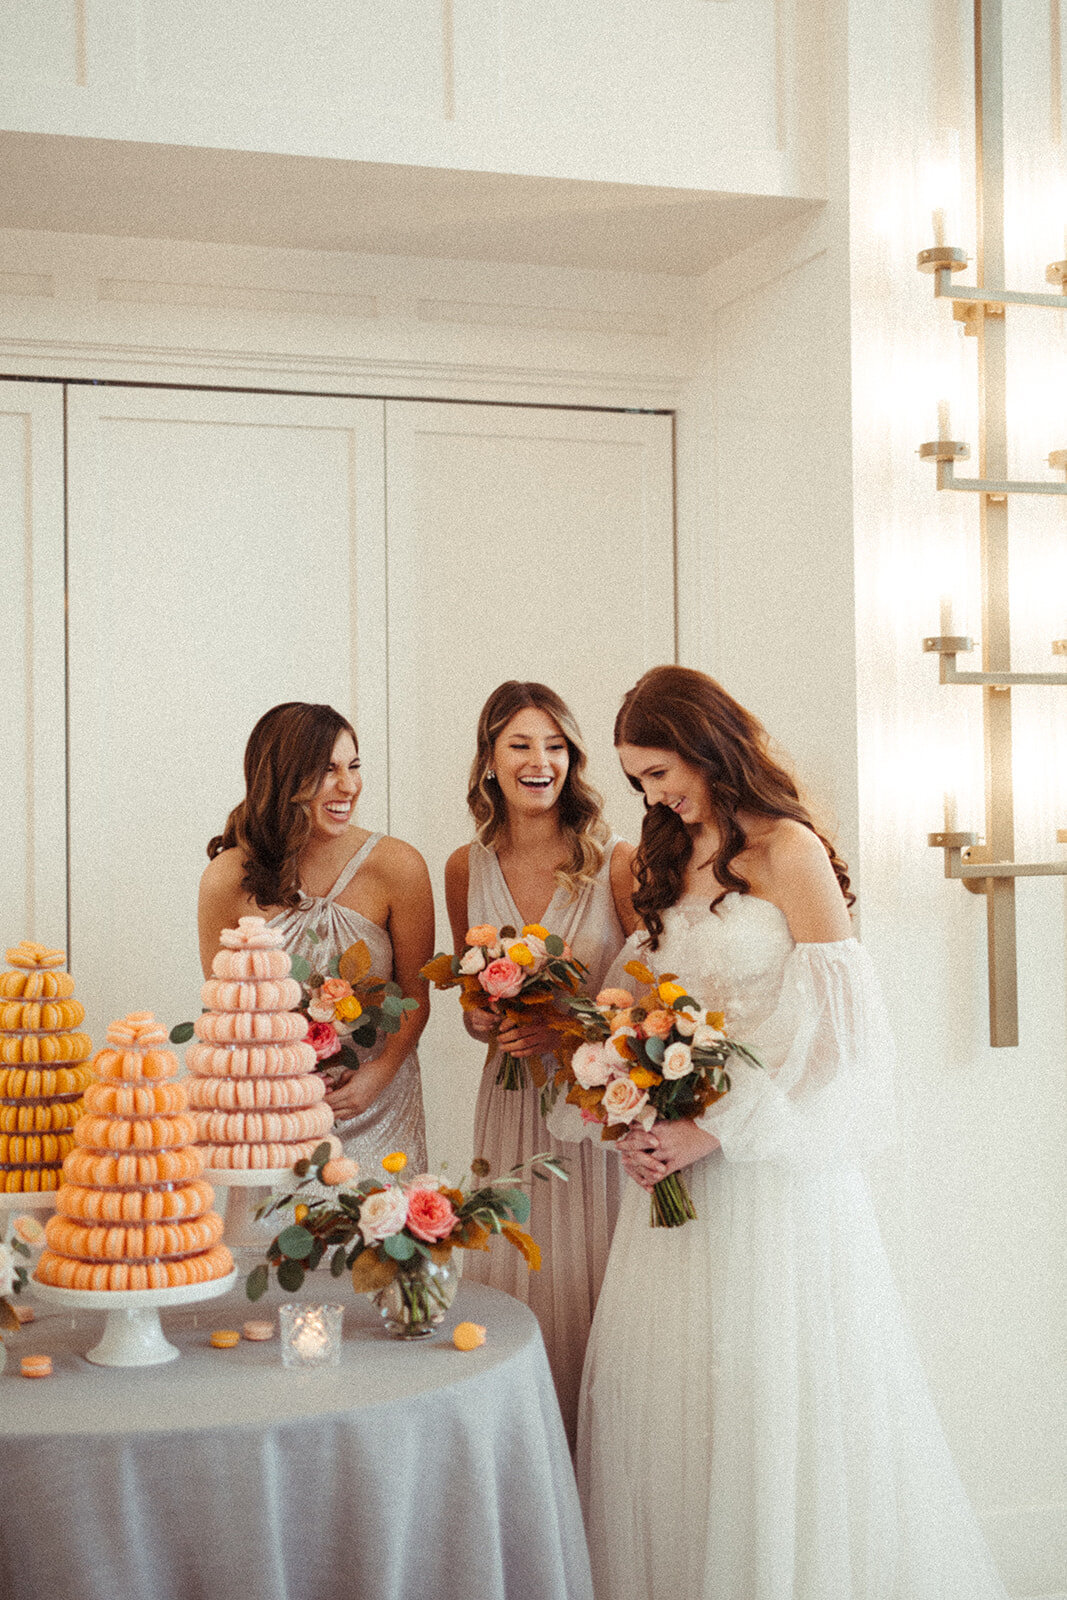 A bride wearing a white wedding gown holds a bouquet of flowers with two women smiling next to a table filled with macaroons.